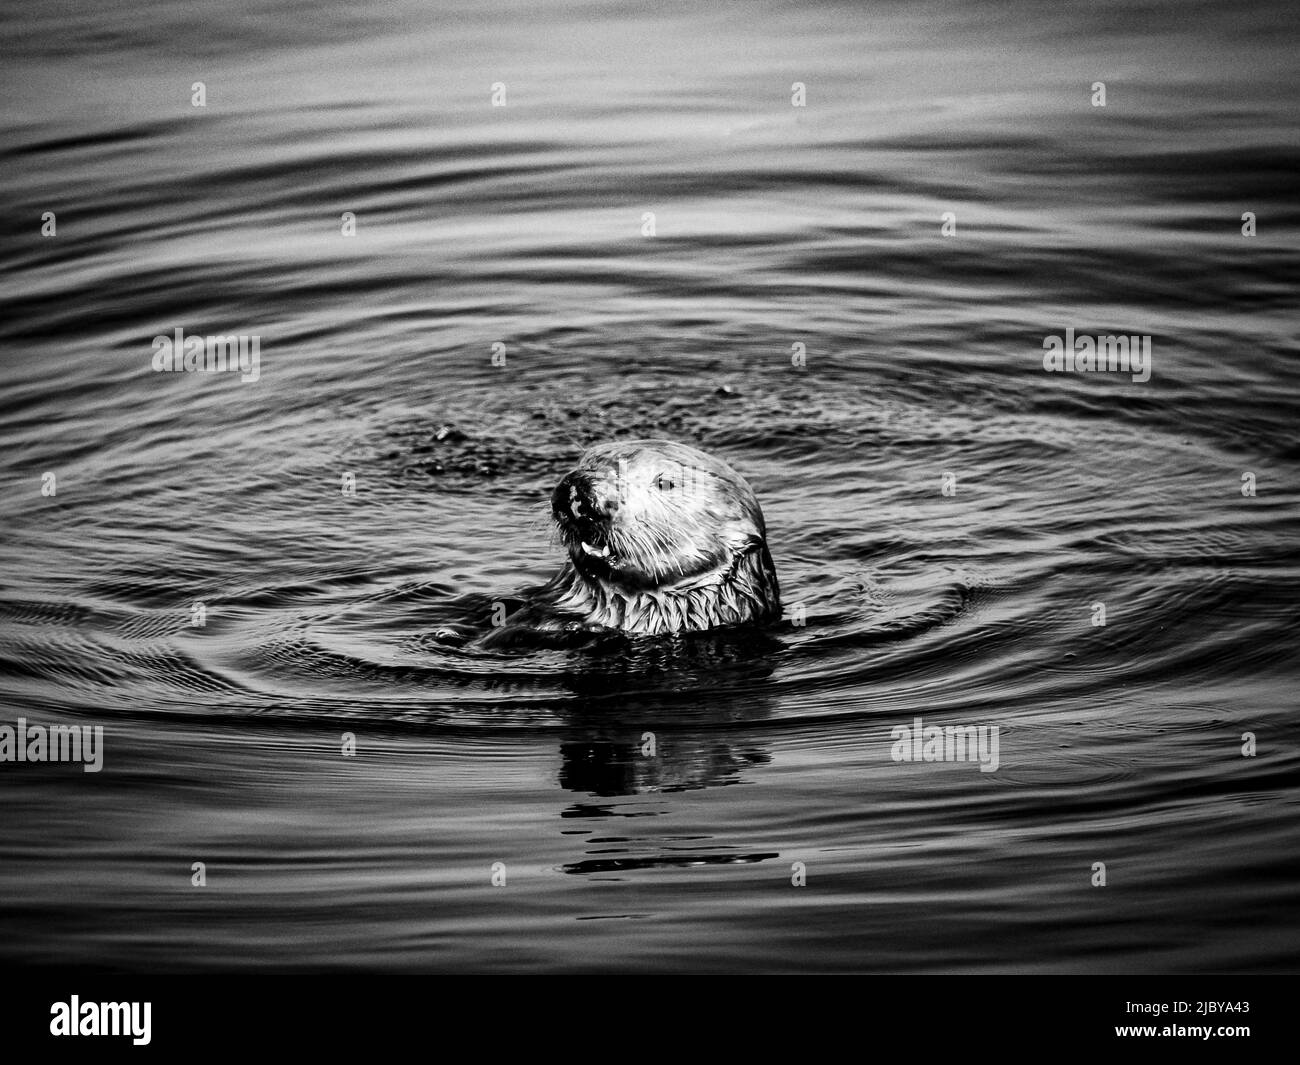 Floating sea otter Black and White Stock Photos & Images - Alamy